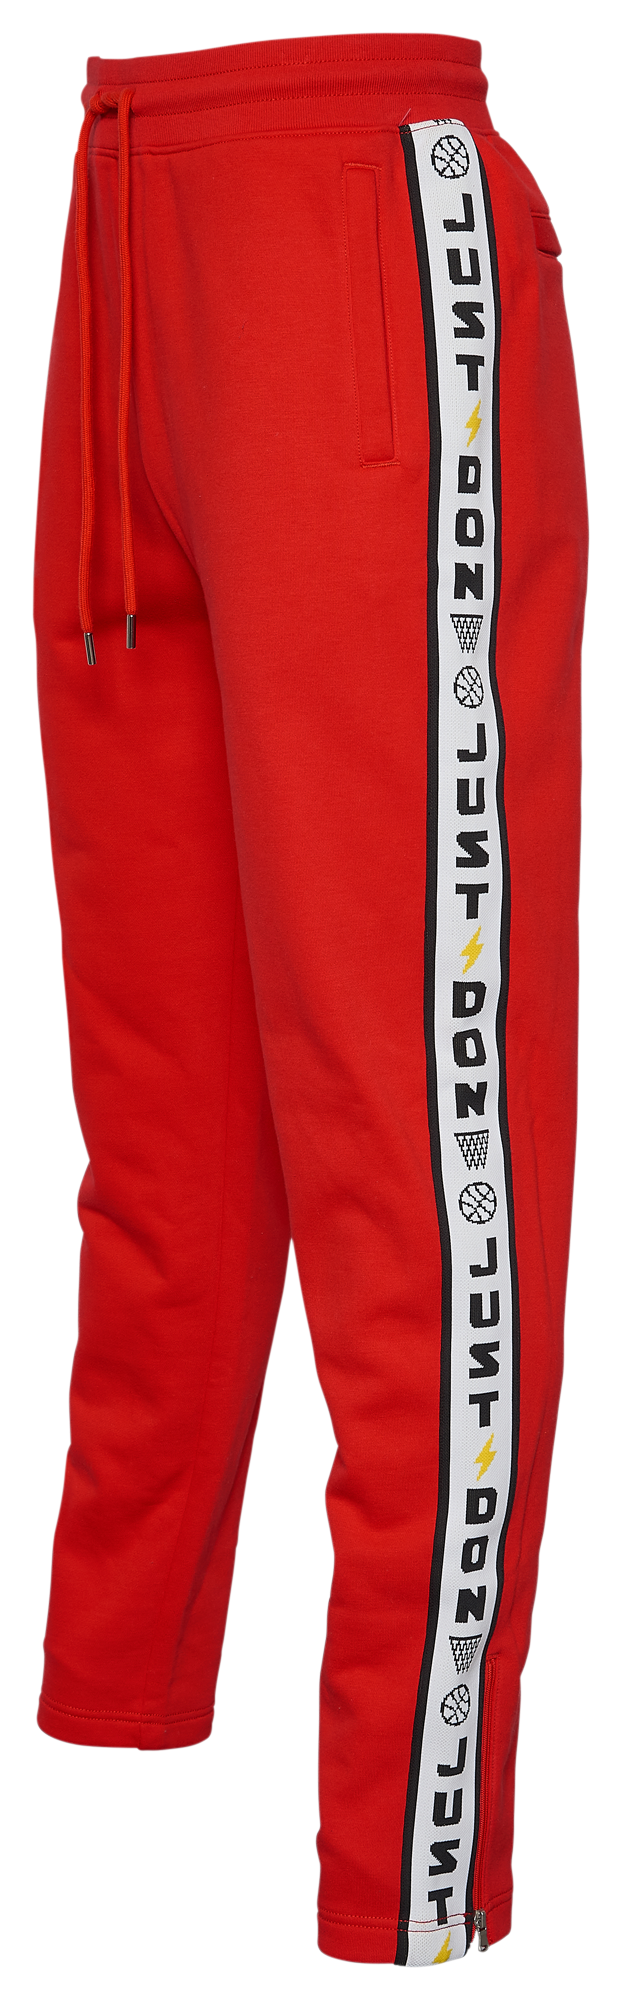 All City By Just Don Sweatpants  - Men's